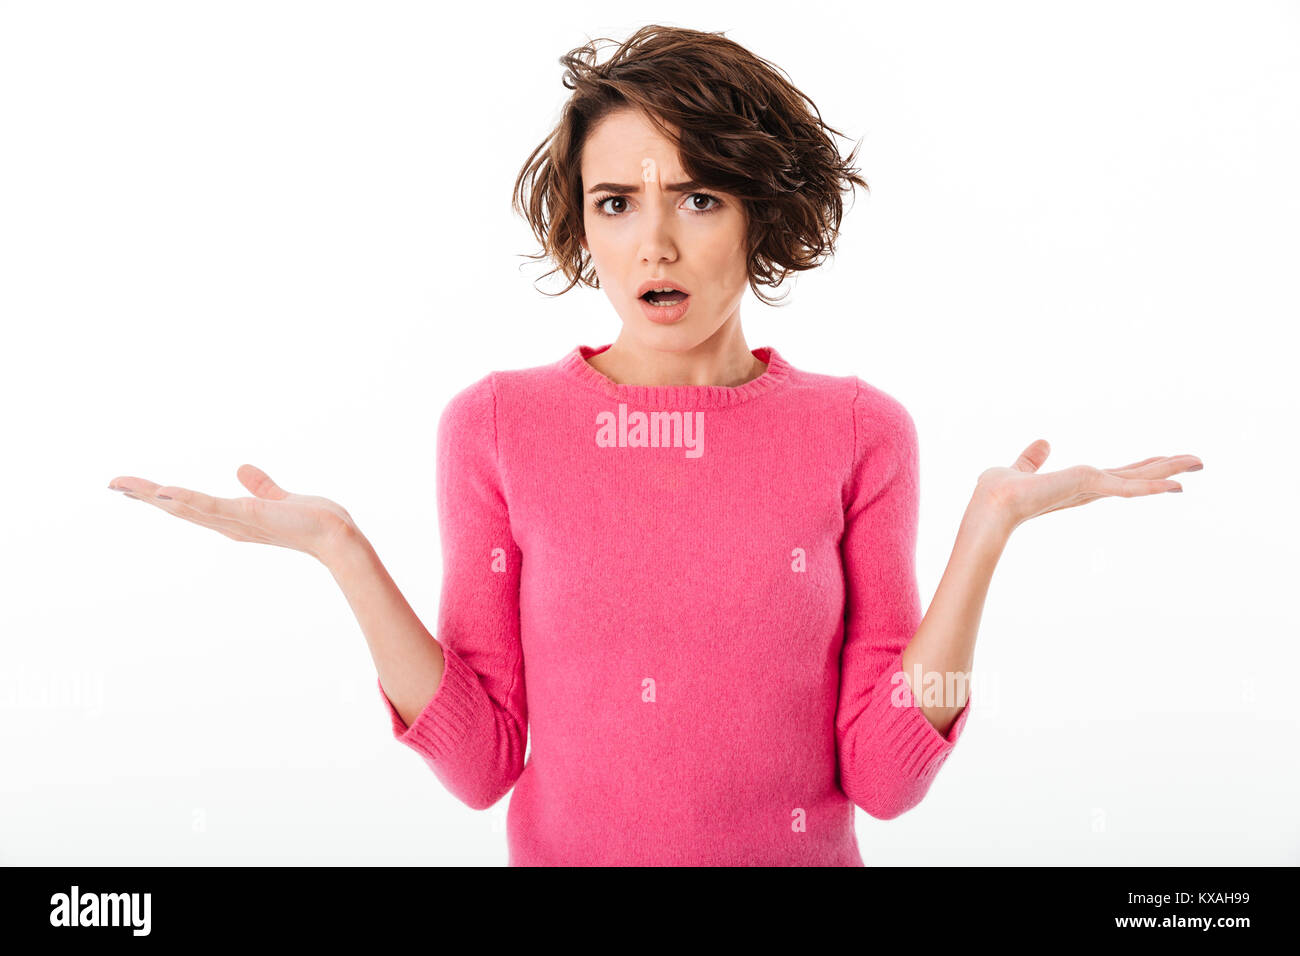 Portrait of a confused young girl shrugging shoulders and looking at camera isolated over white background Stock Photo